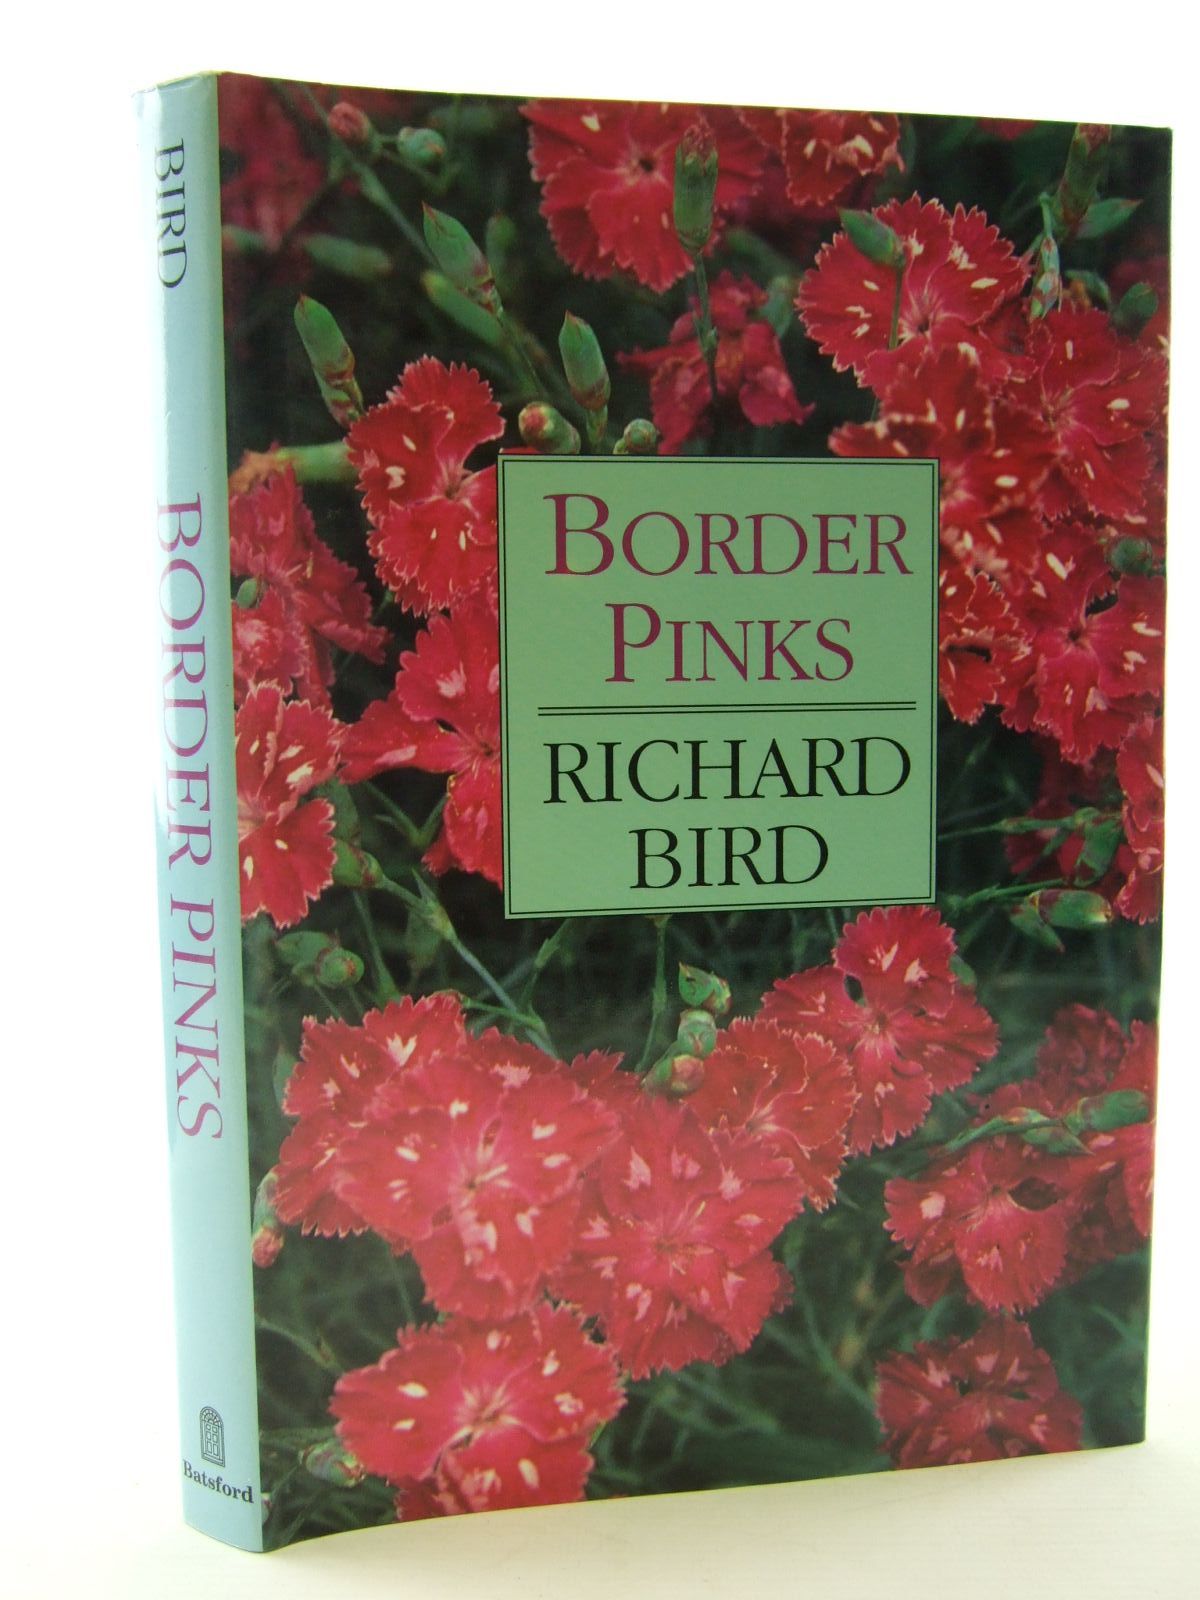 Photo of BORDER PINKS written by Bird, Richard published by B.T. Batsford Ltd. (STOCK CODE: 2108502)  for sale by Stella & Rose's Books